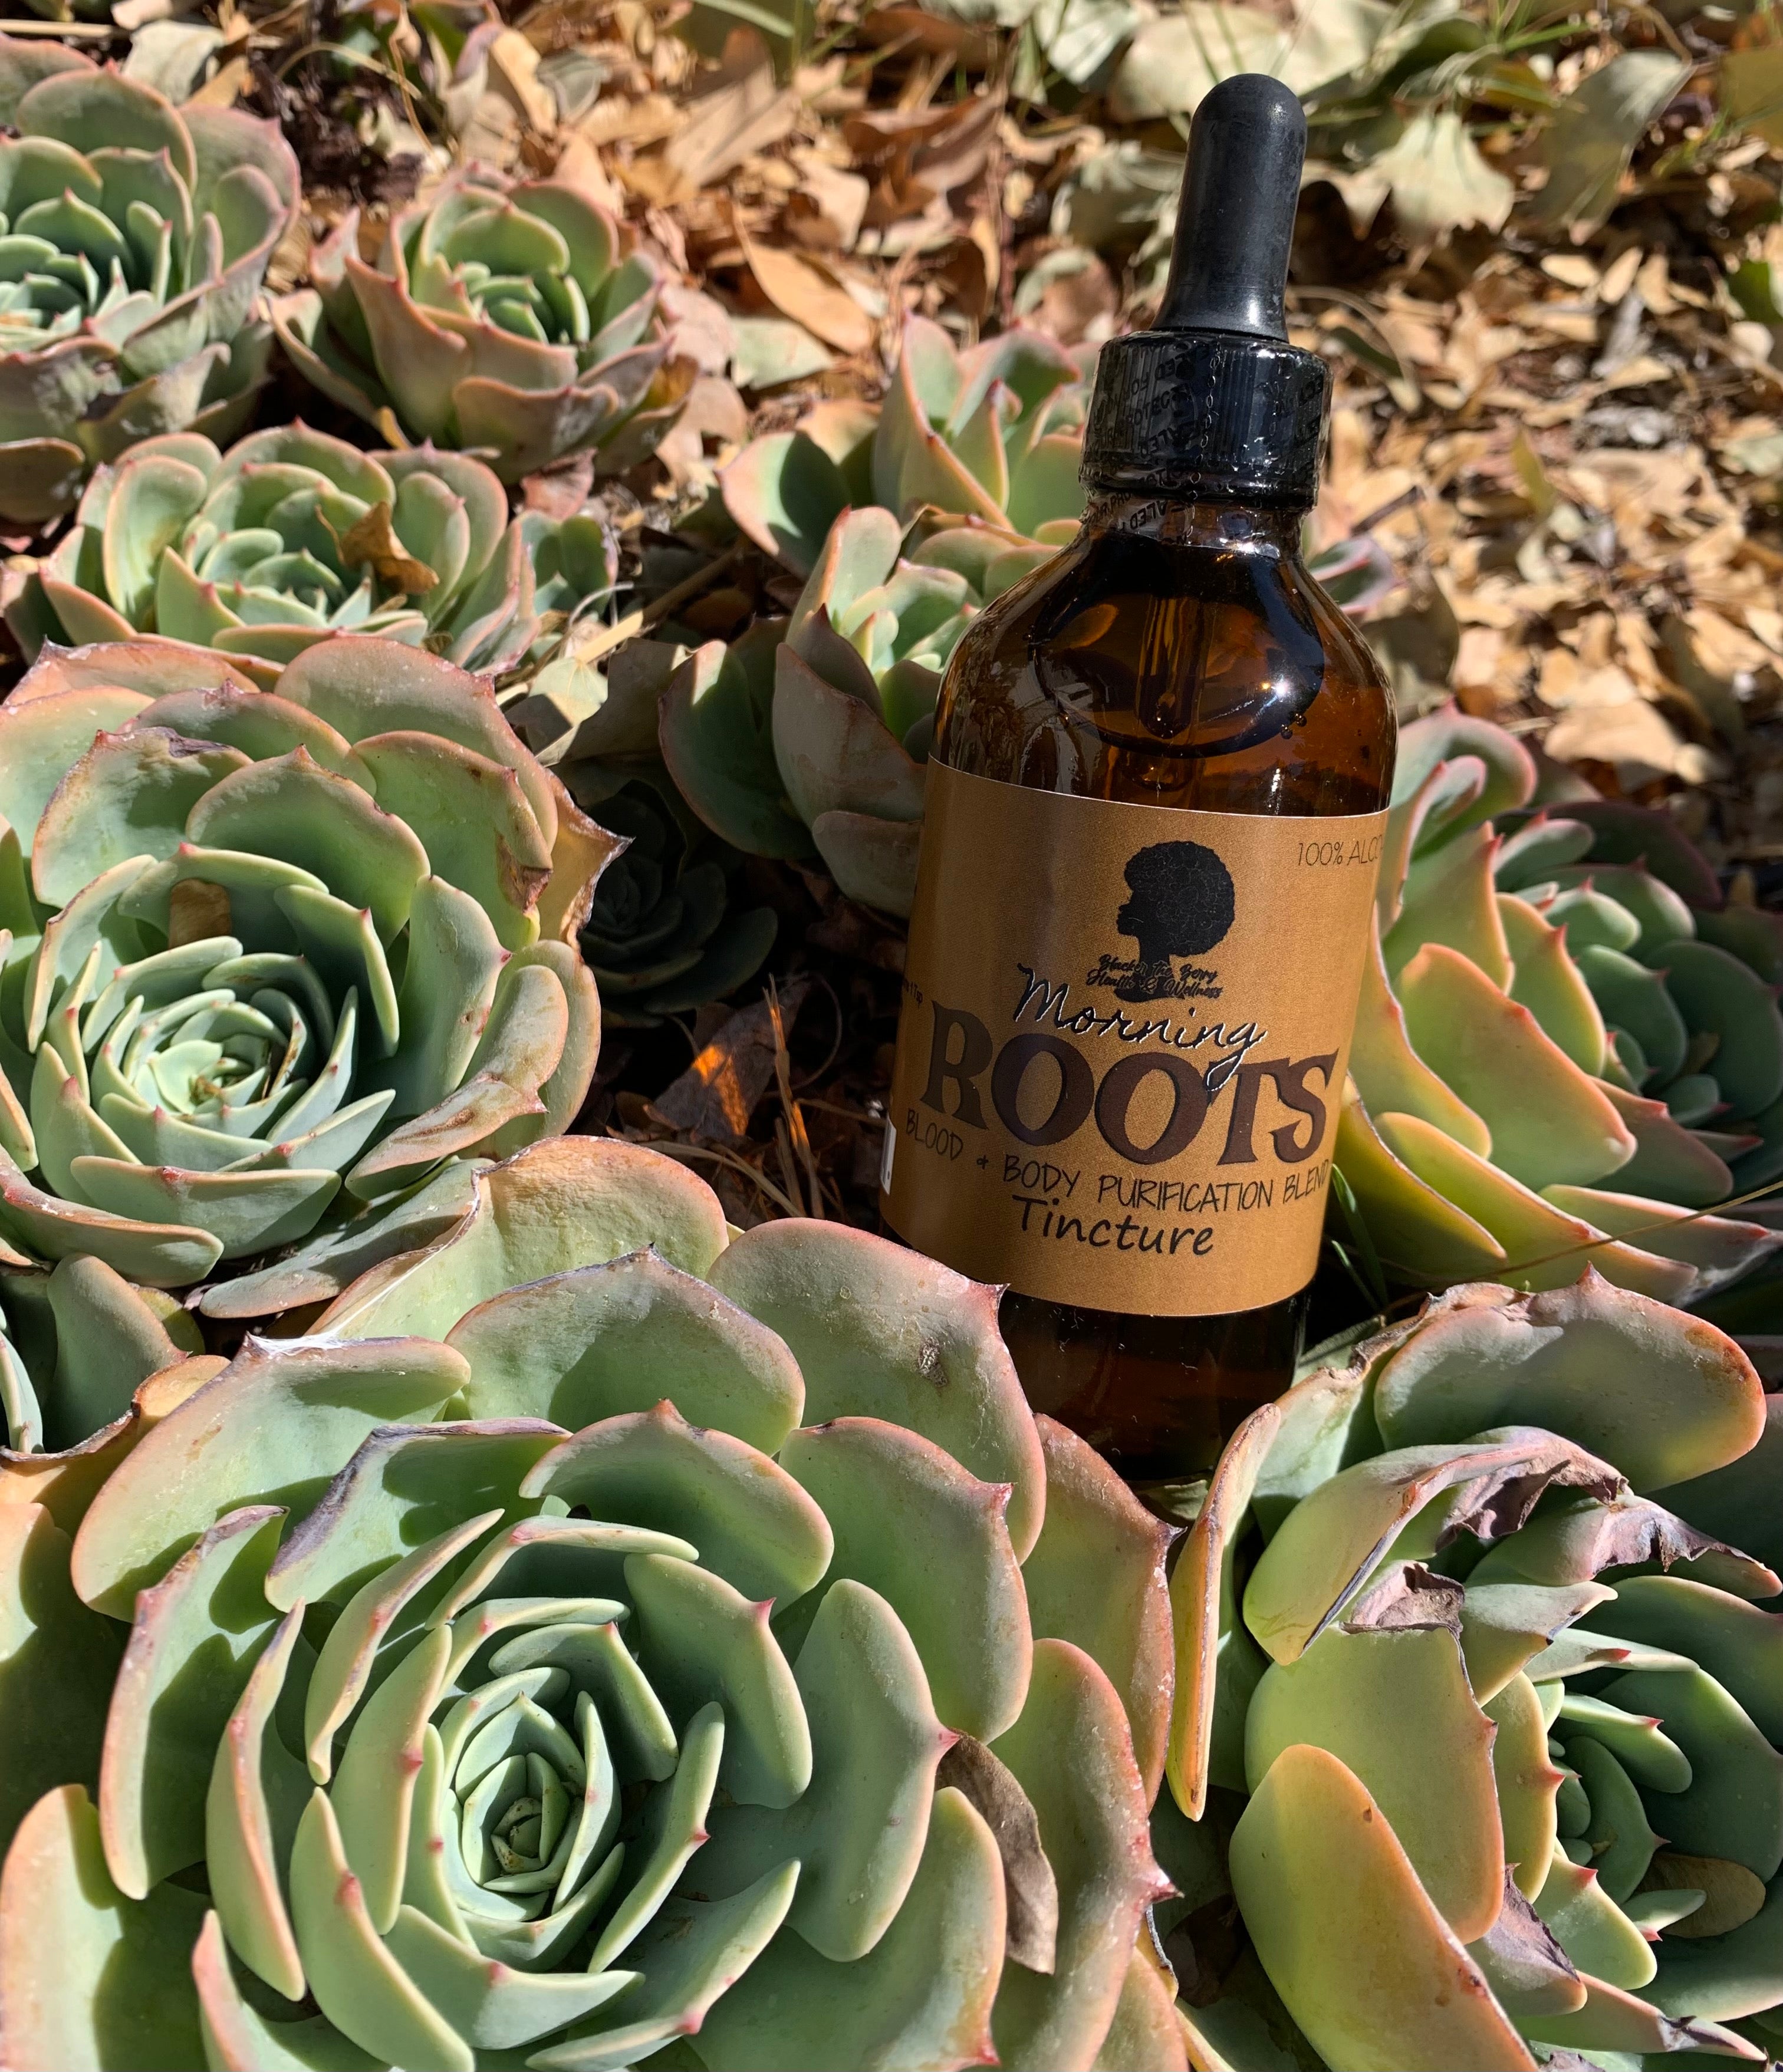 Morning ROOTS - BLOOD & BODY PURIFYING TINCTURE BLEND